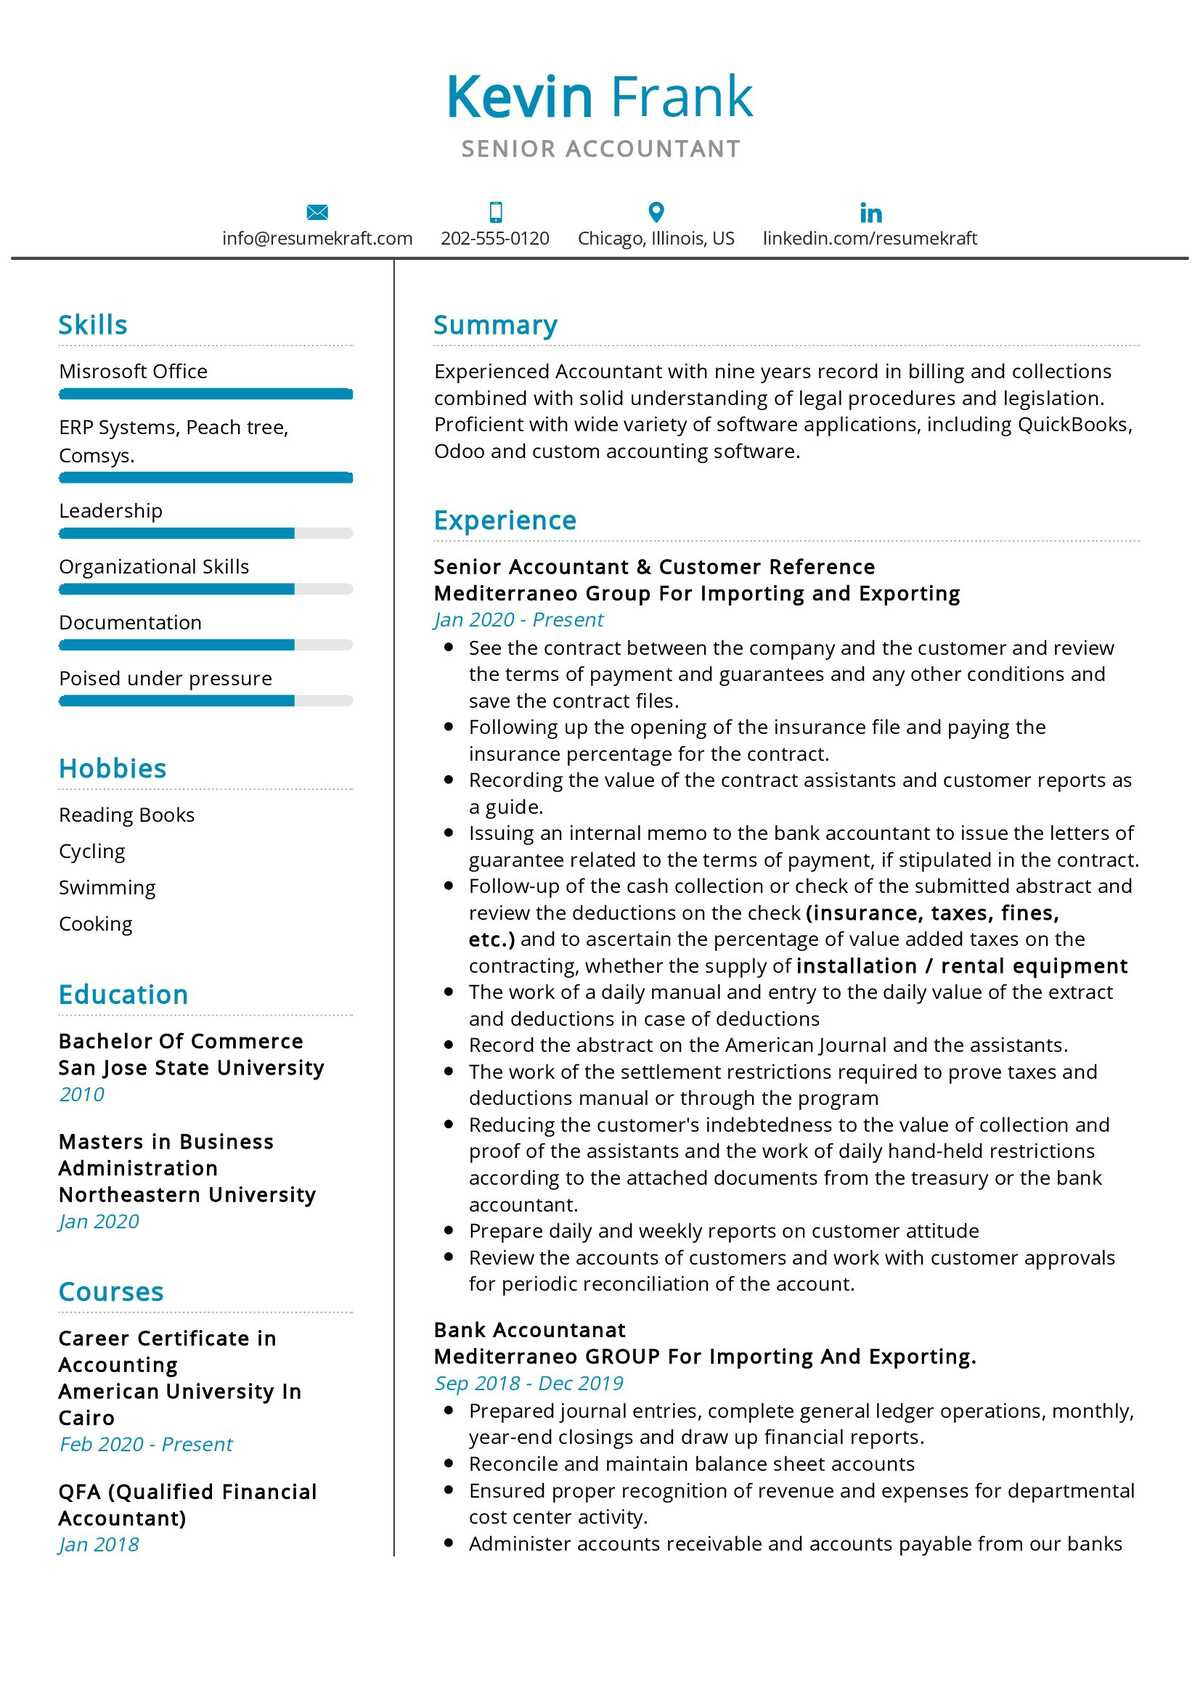 Sample Summary for Resume In Accounting Senior Accountant Resume Example 2021 Writing Guide – Resumekraft